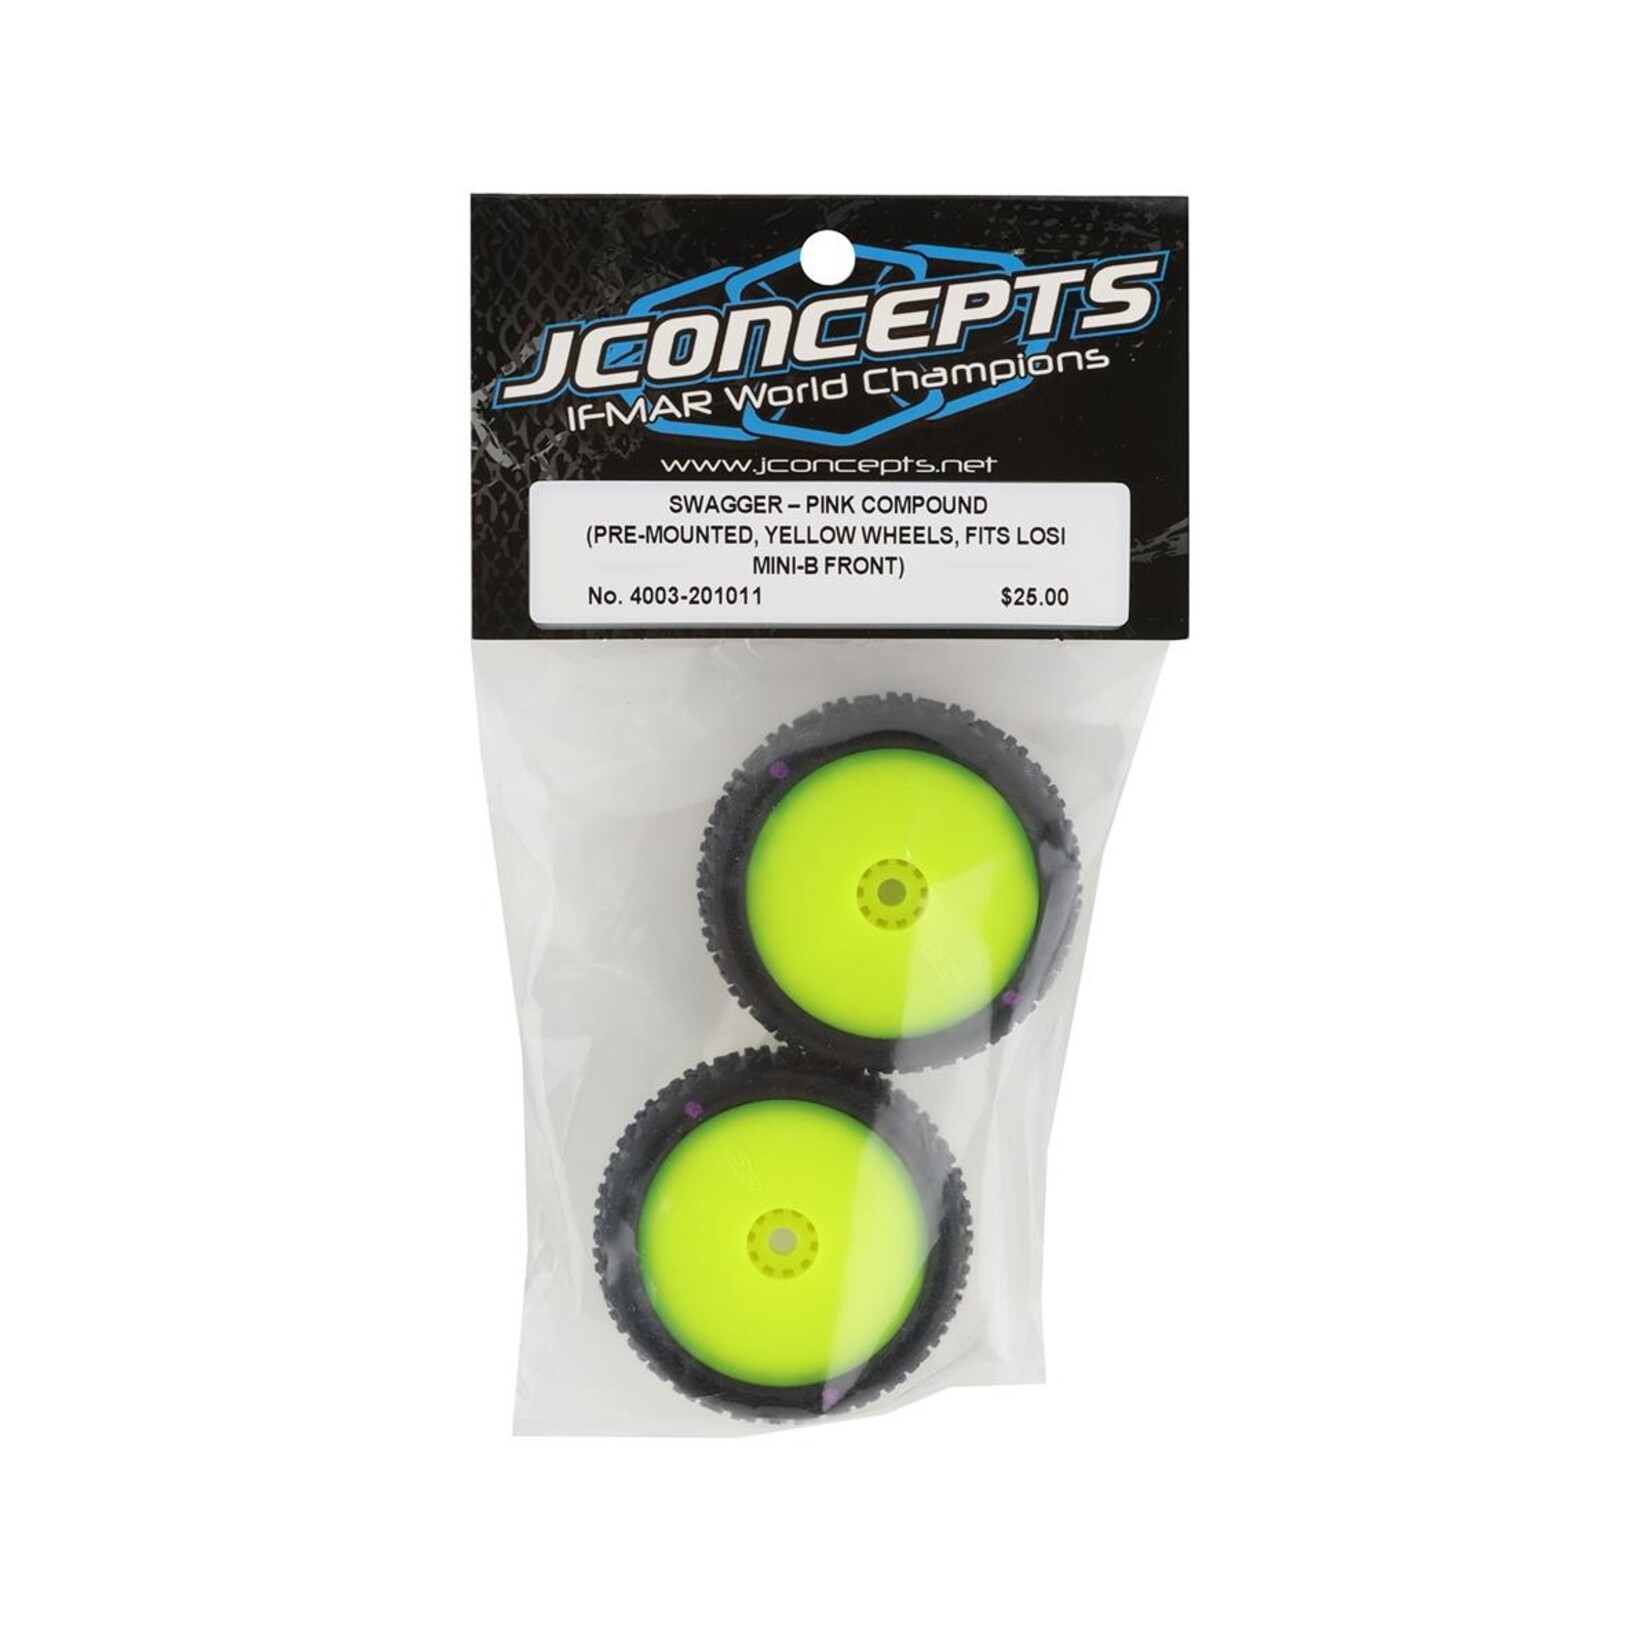 JConcepts JConcepts Mini-B Swagger Pre-Mounted Front Tires (Yellow) (2) (Pink) #4003-201011